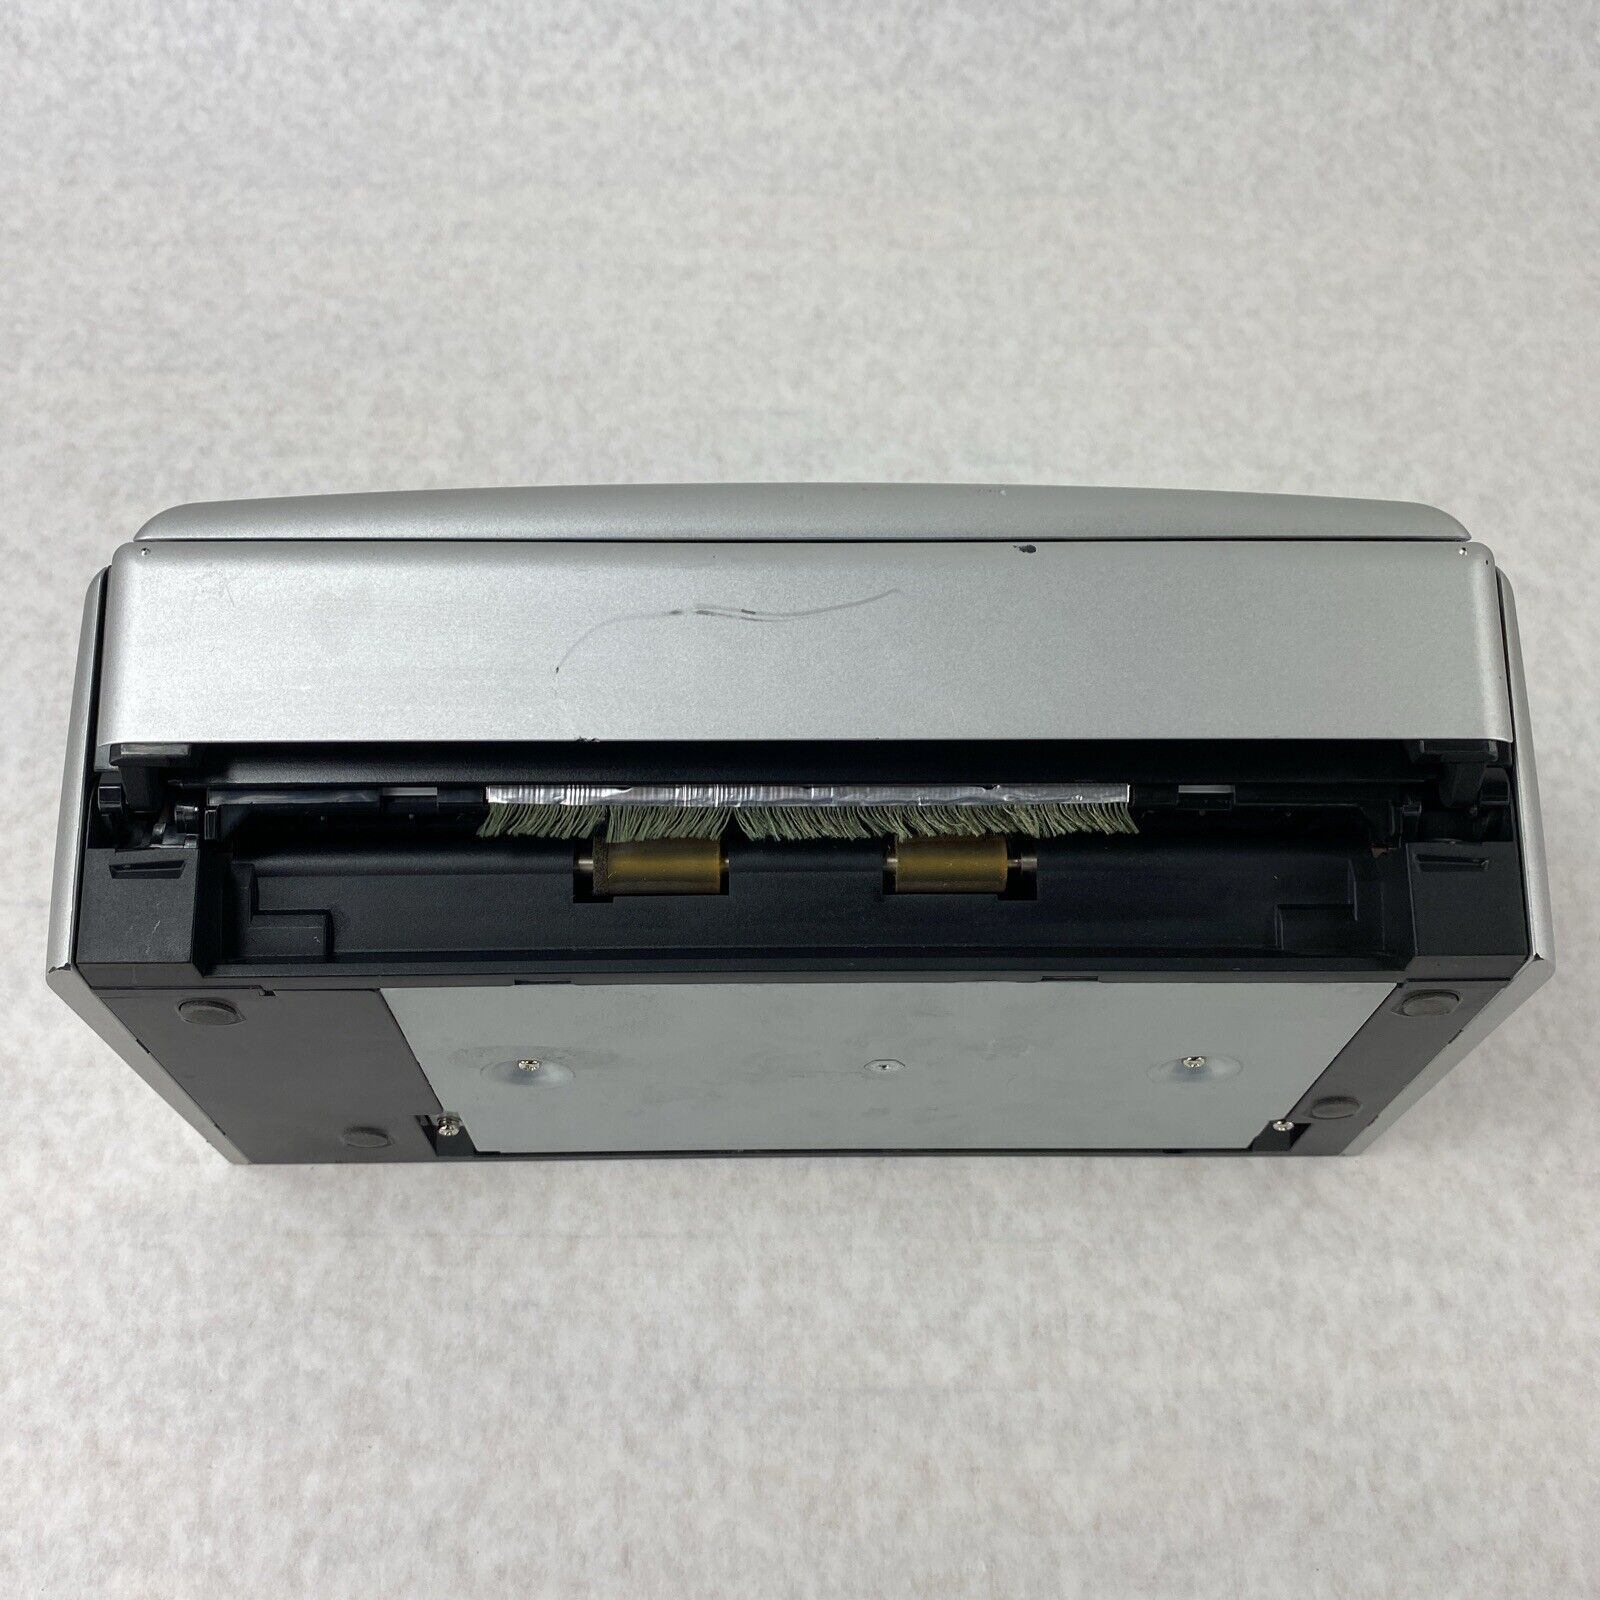 Fujitsu ScanSnap S1500 Duplex Sheetfed Color Image Scanner No AC Adapter